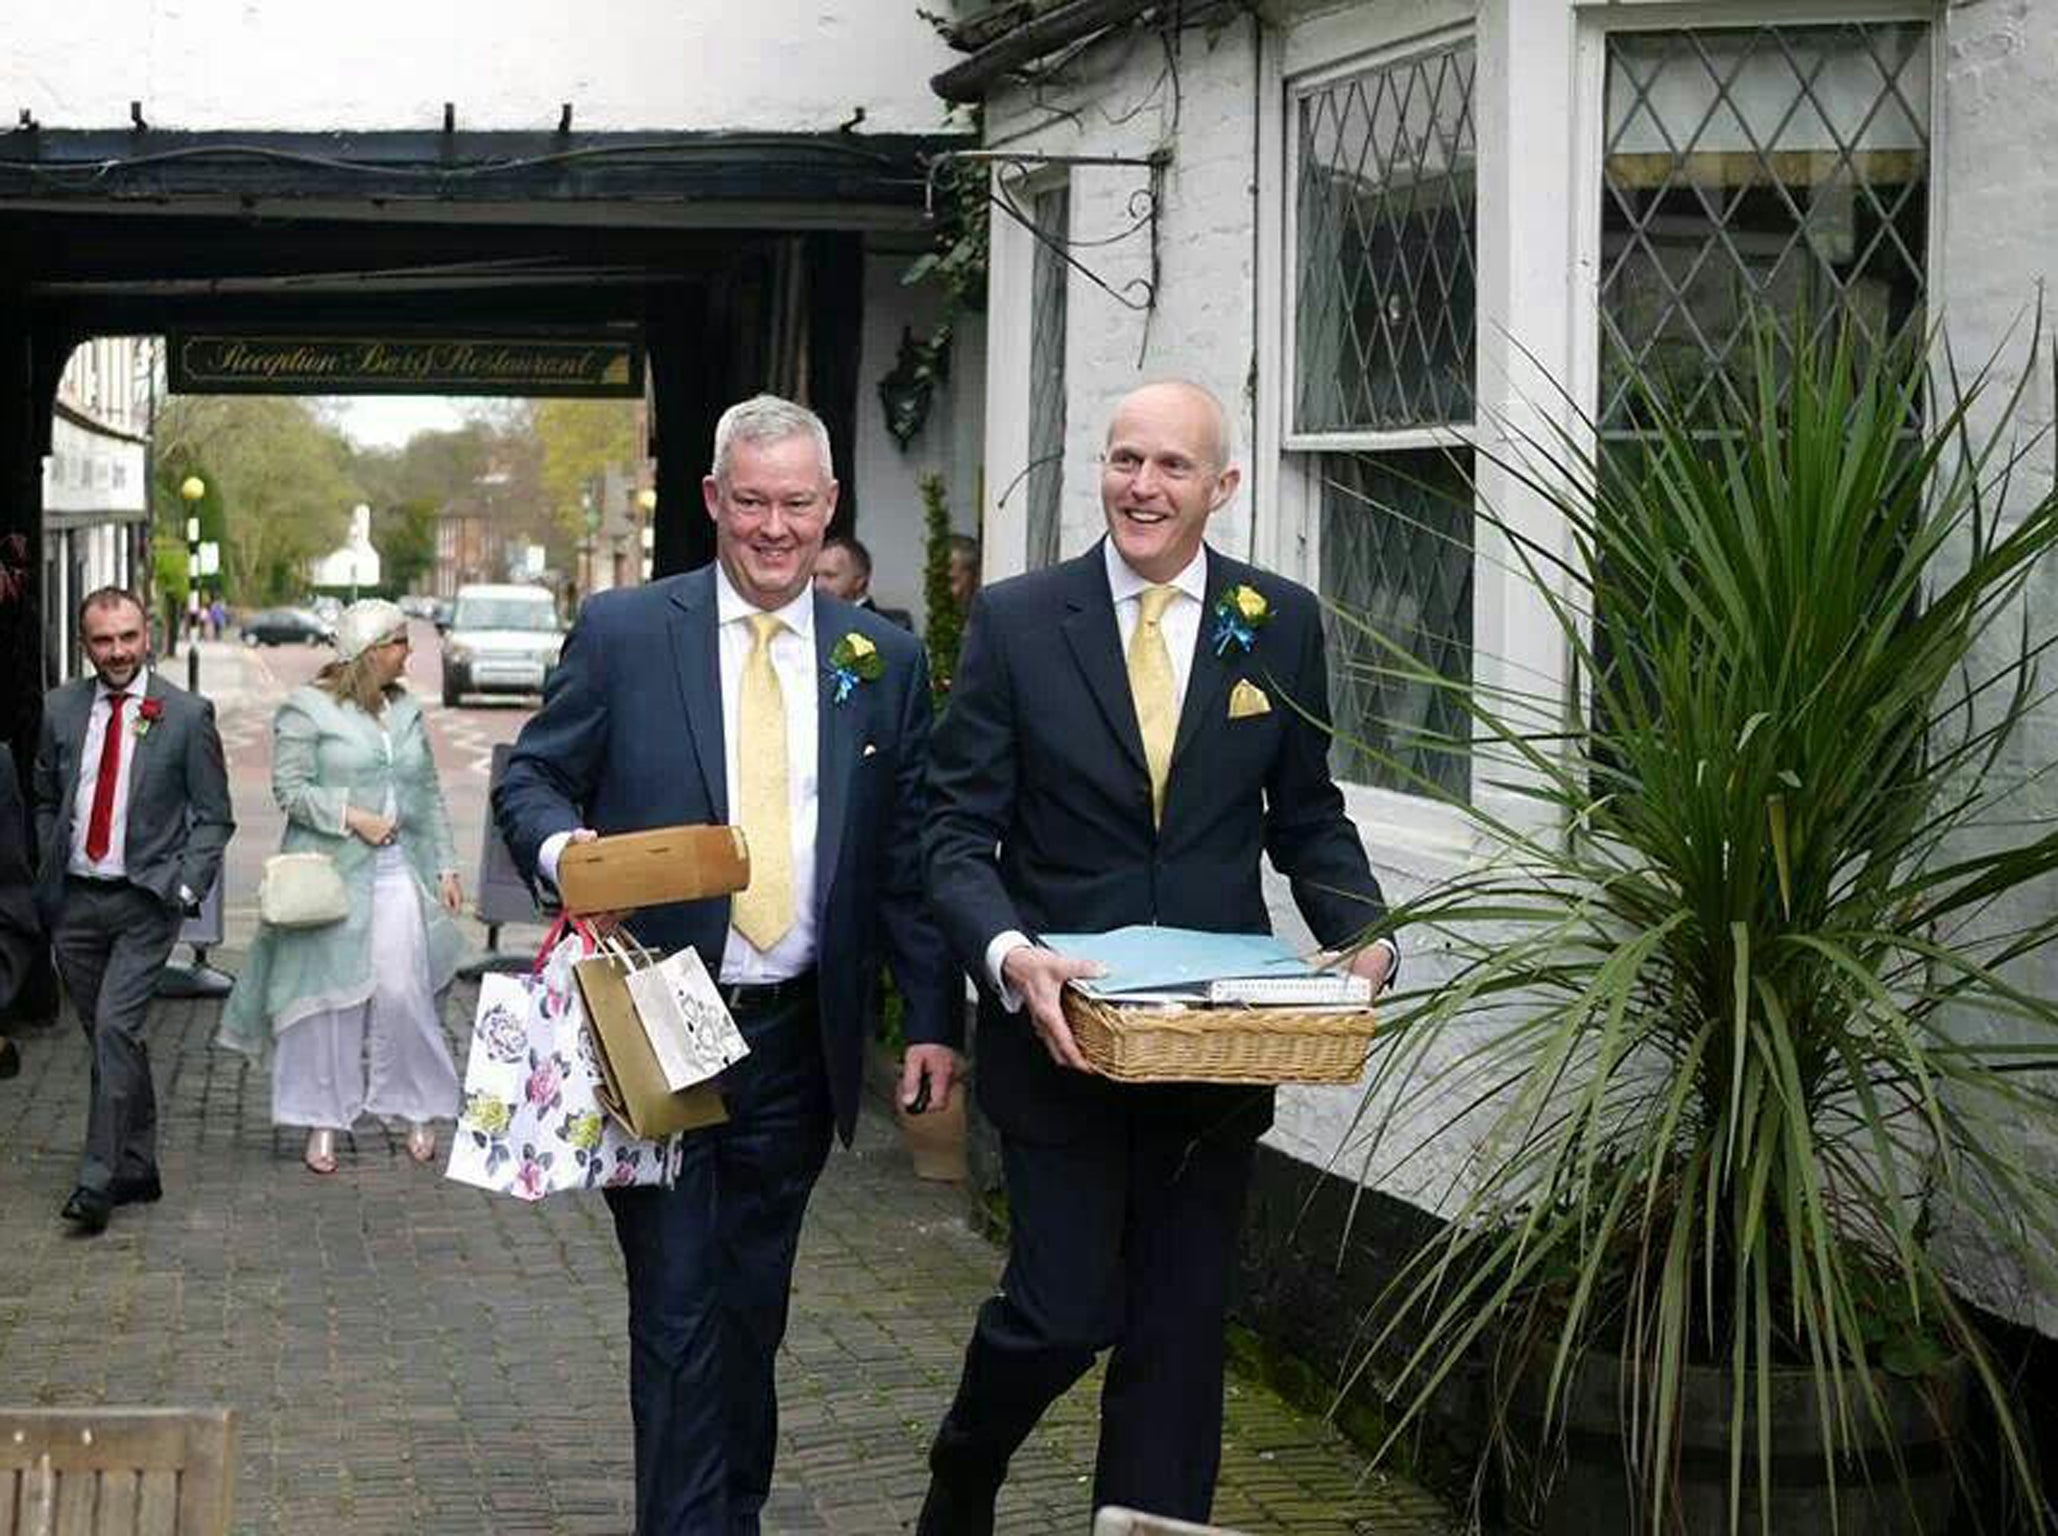 Canon Jeremy Pemberton, 58, and his husband Laurence Cunnington, 51, leave for their honeymoon following the wedding